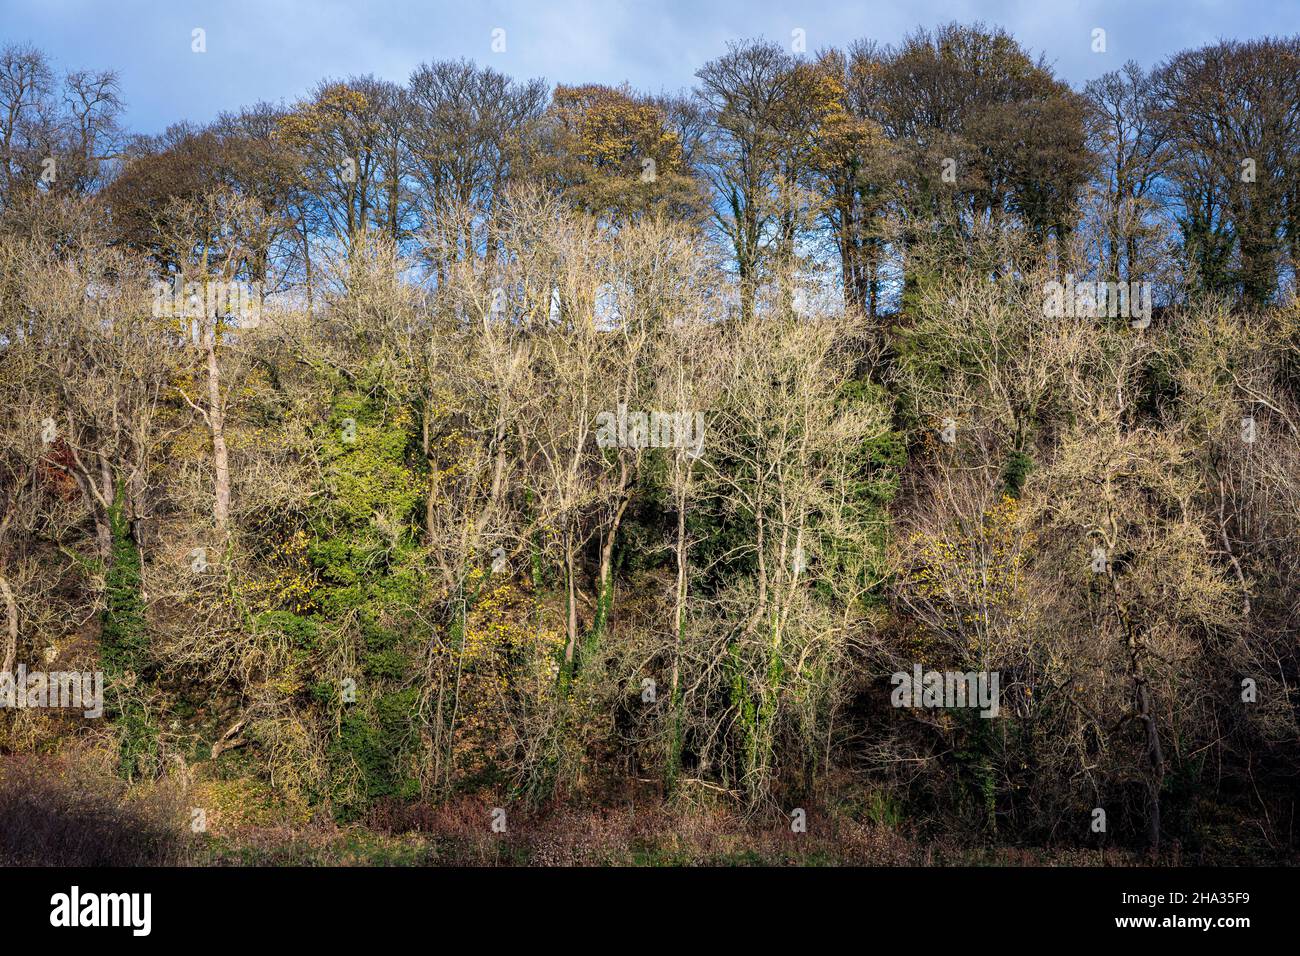 Ash trees and sycamores on the wooded banks of the River Lathkill, Lathkill Dale, near Youlgrave, Peak District National Park, Derbyshire Stock Photo